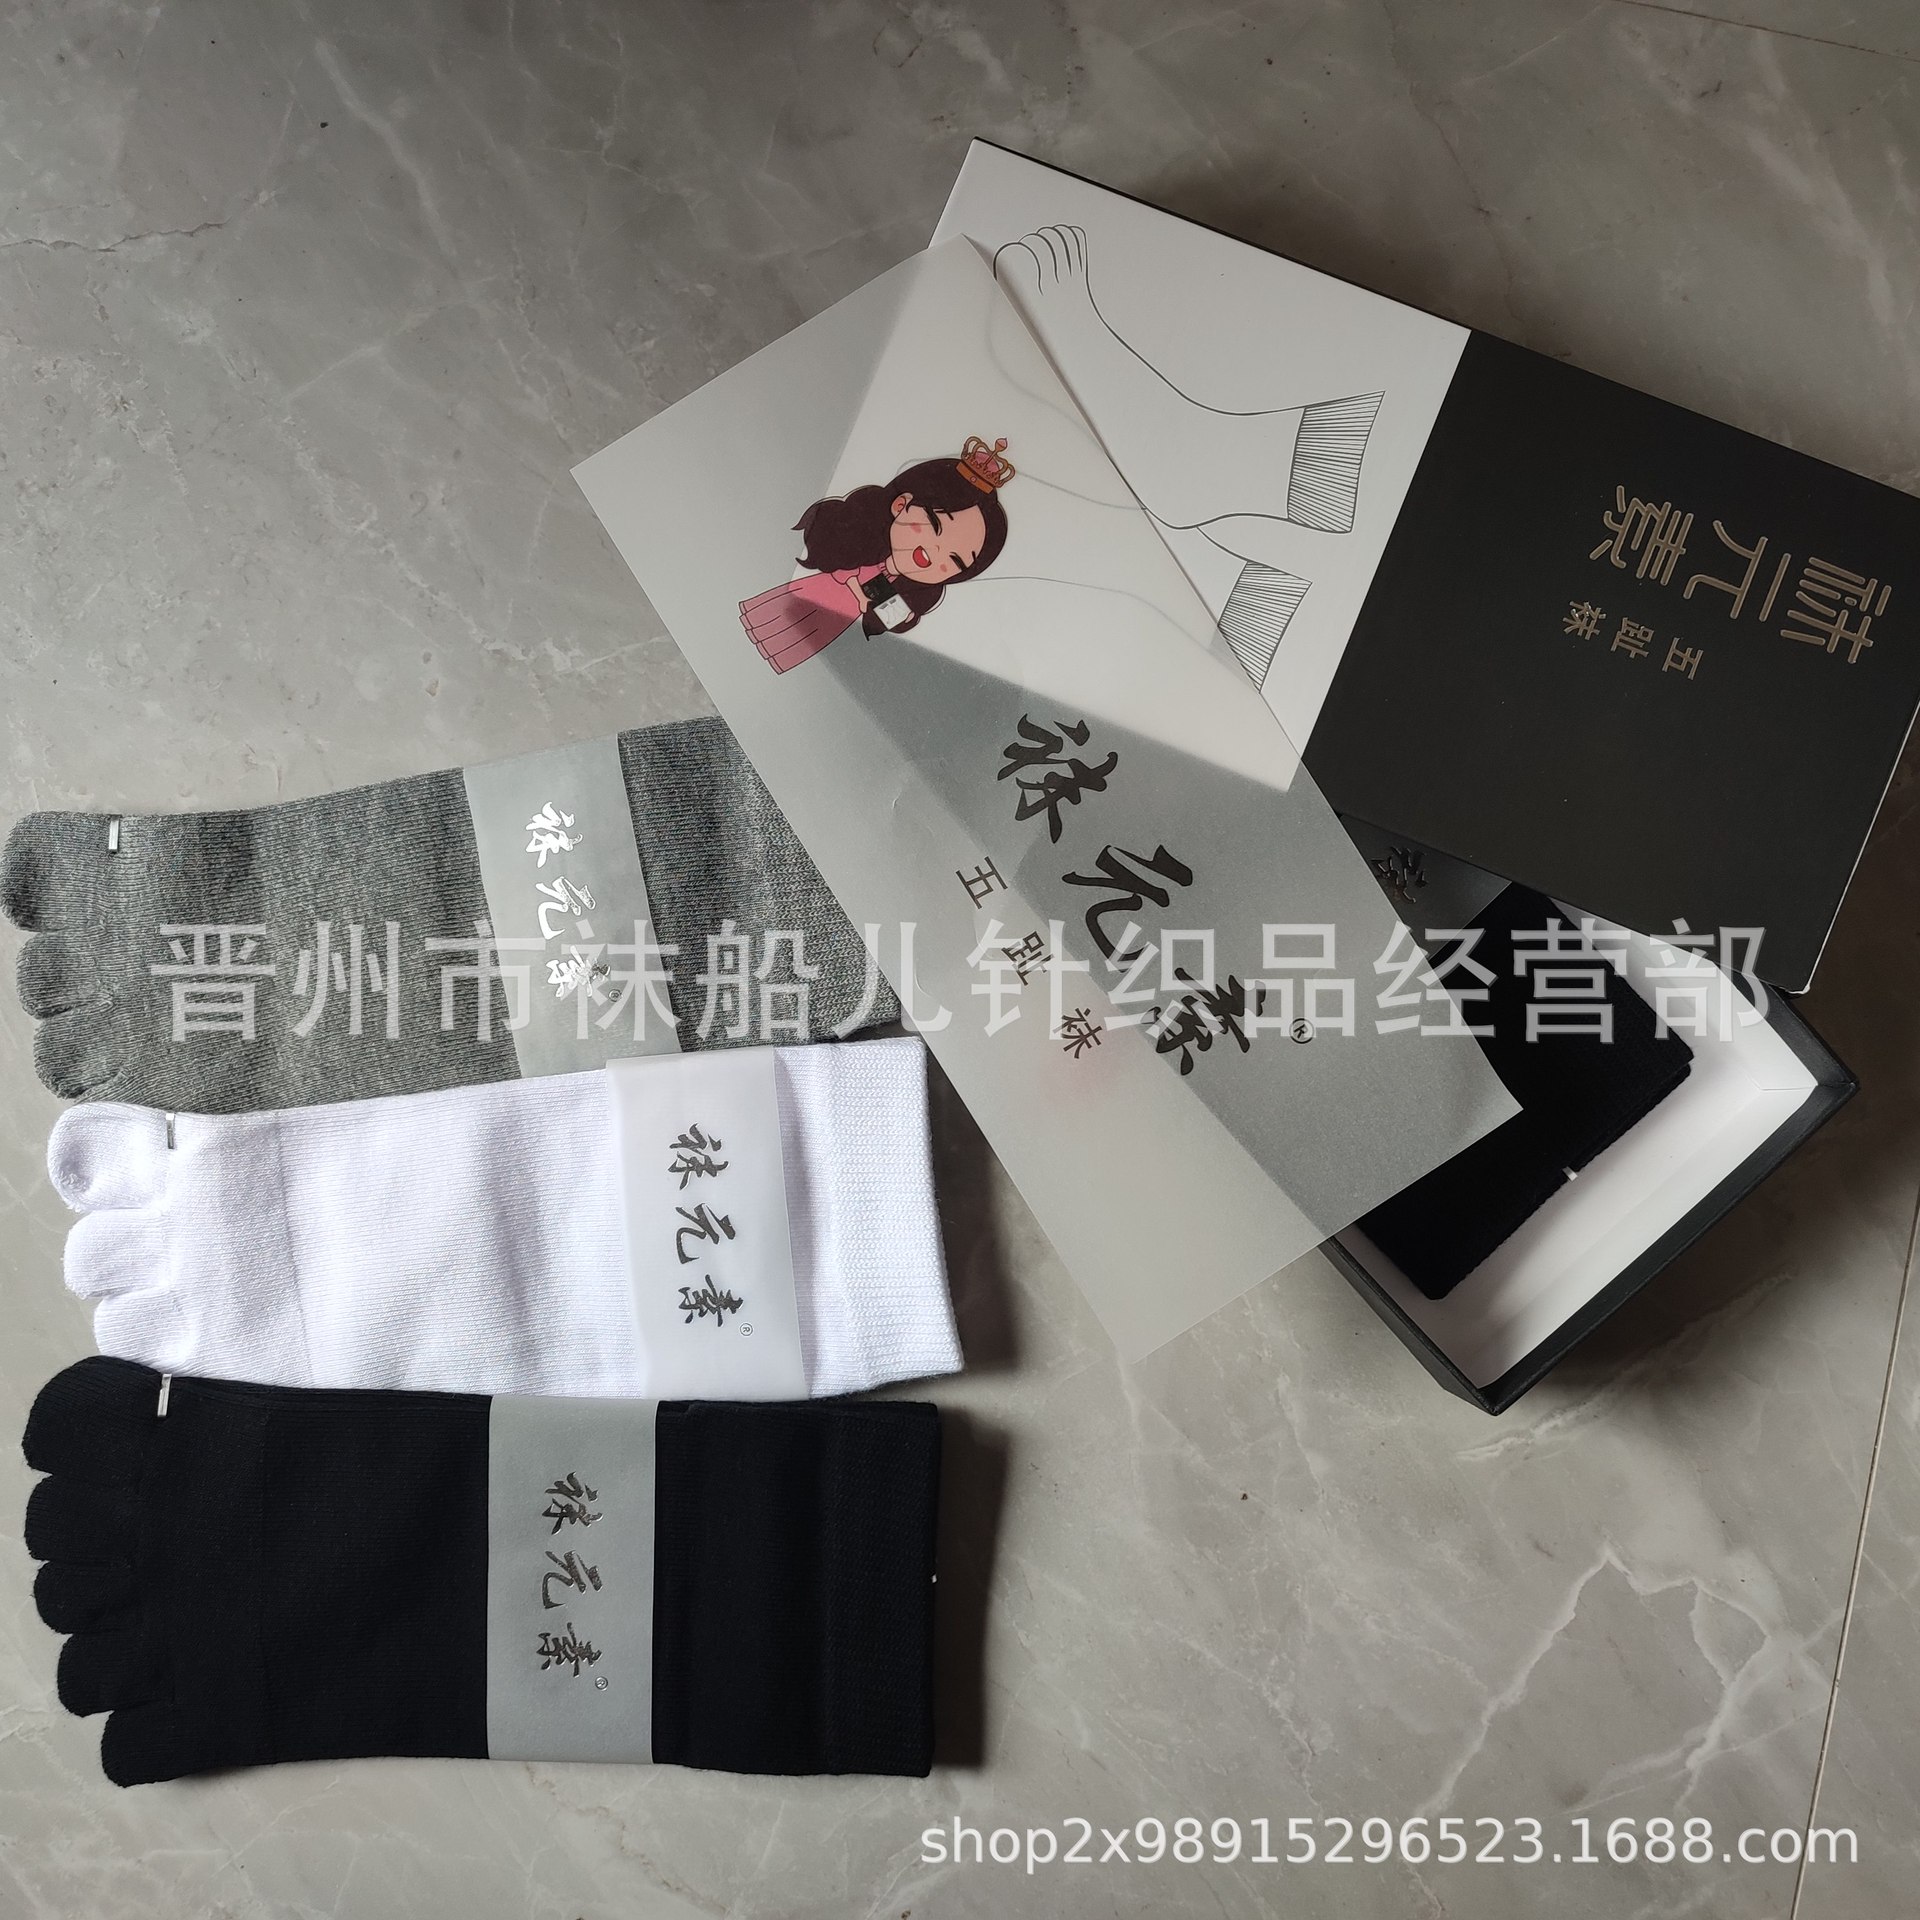 Socks Element Wechat Genuine Men and Women Black White Gray Solid Color Gift Box Socks Various Designs Item No. Support One